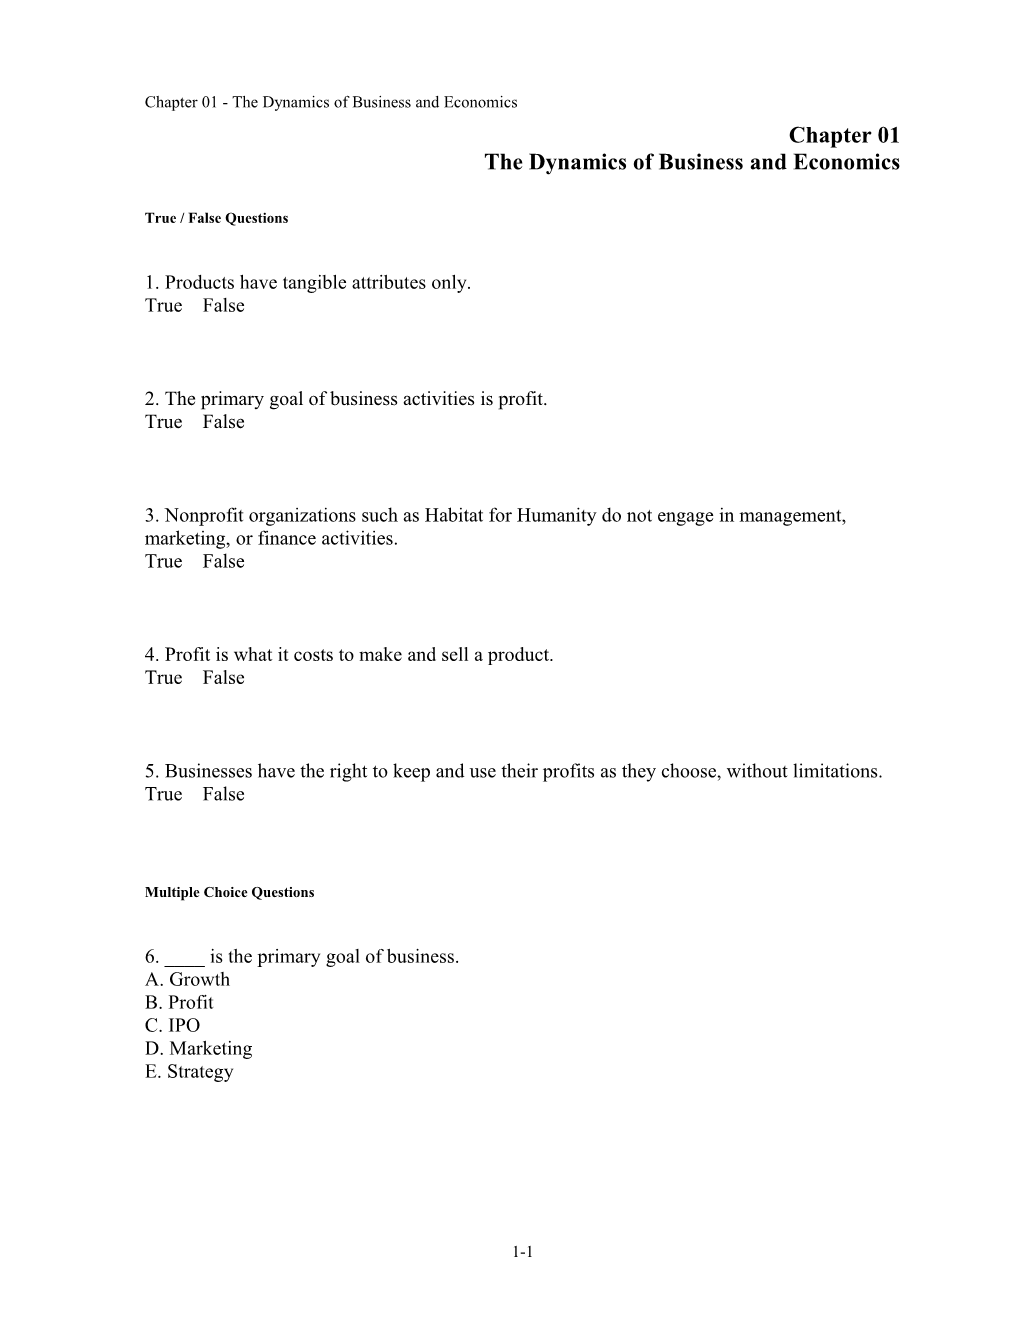 Chapter 01 the Dynamics of Business and Economics